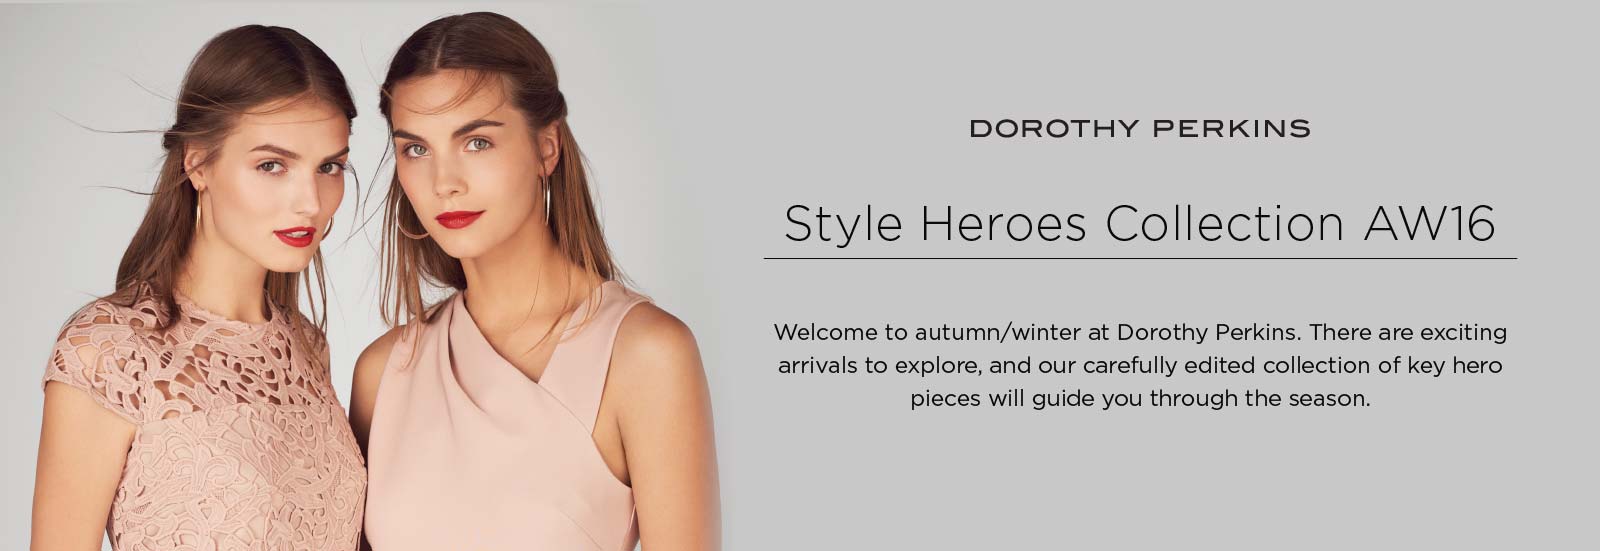 DOROTHY PERKINS STYLE HEROES AW16